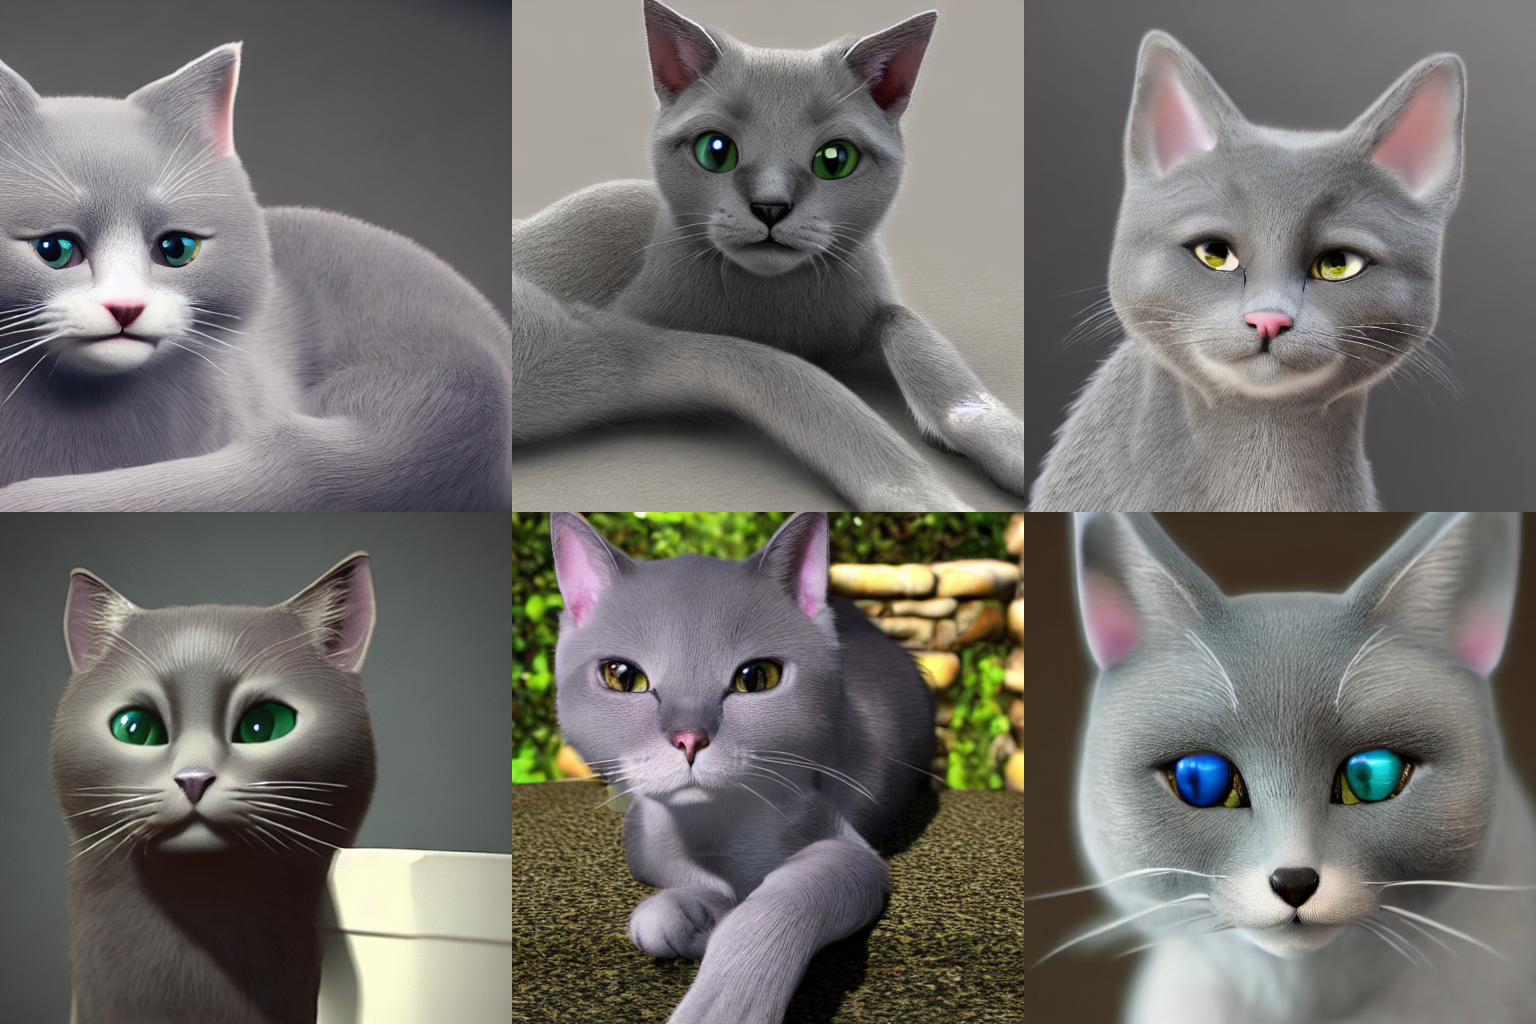 Another example of grey cats in the style of &quot;Unreal Engine.&quot;